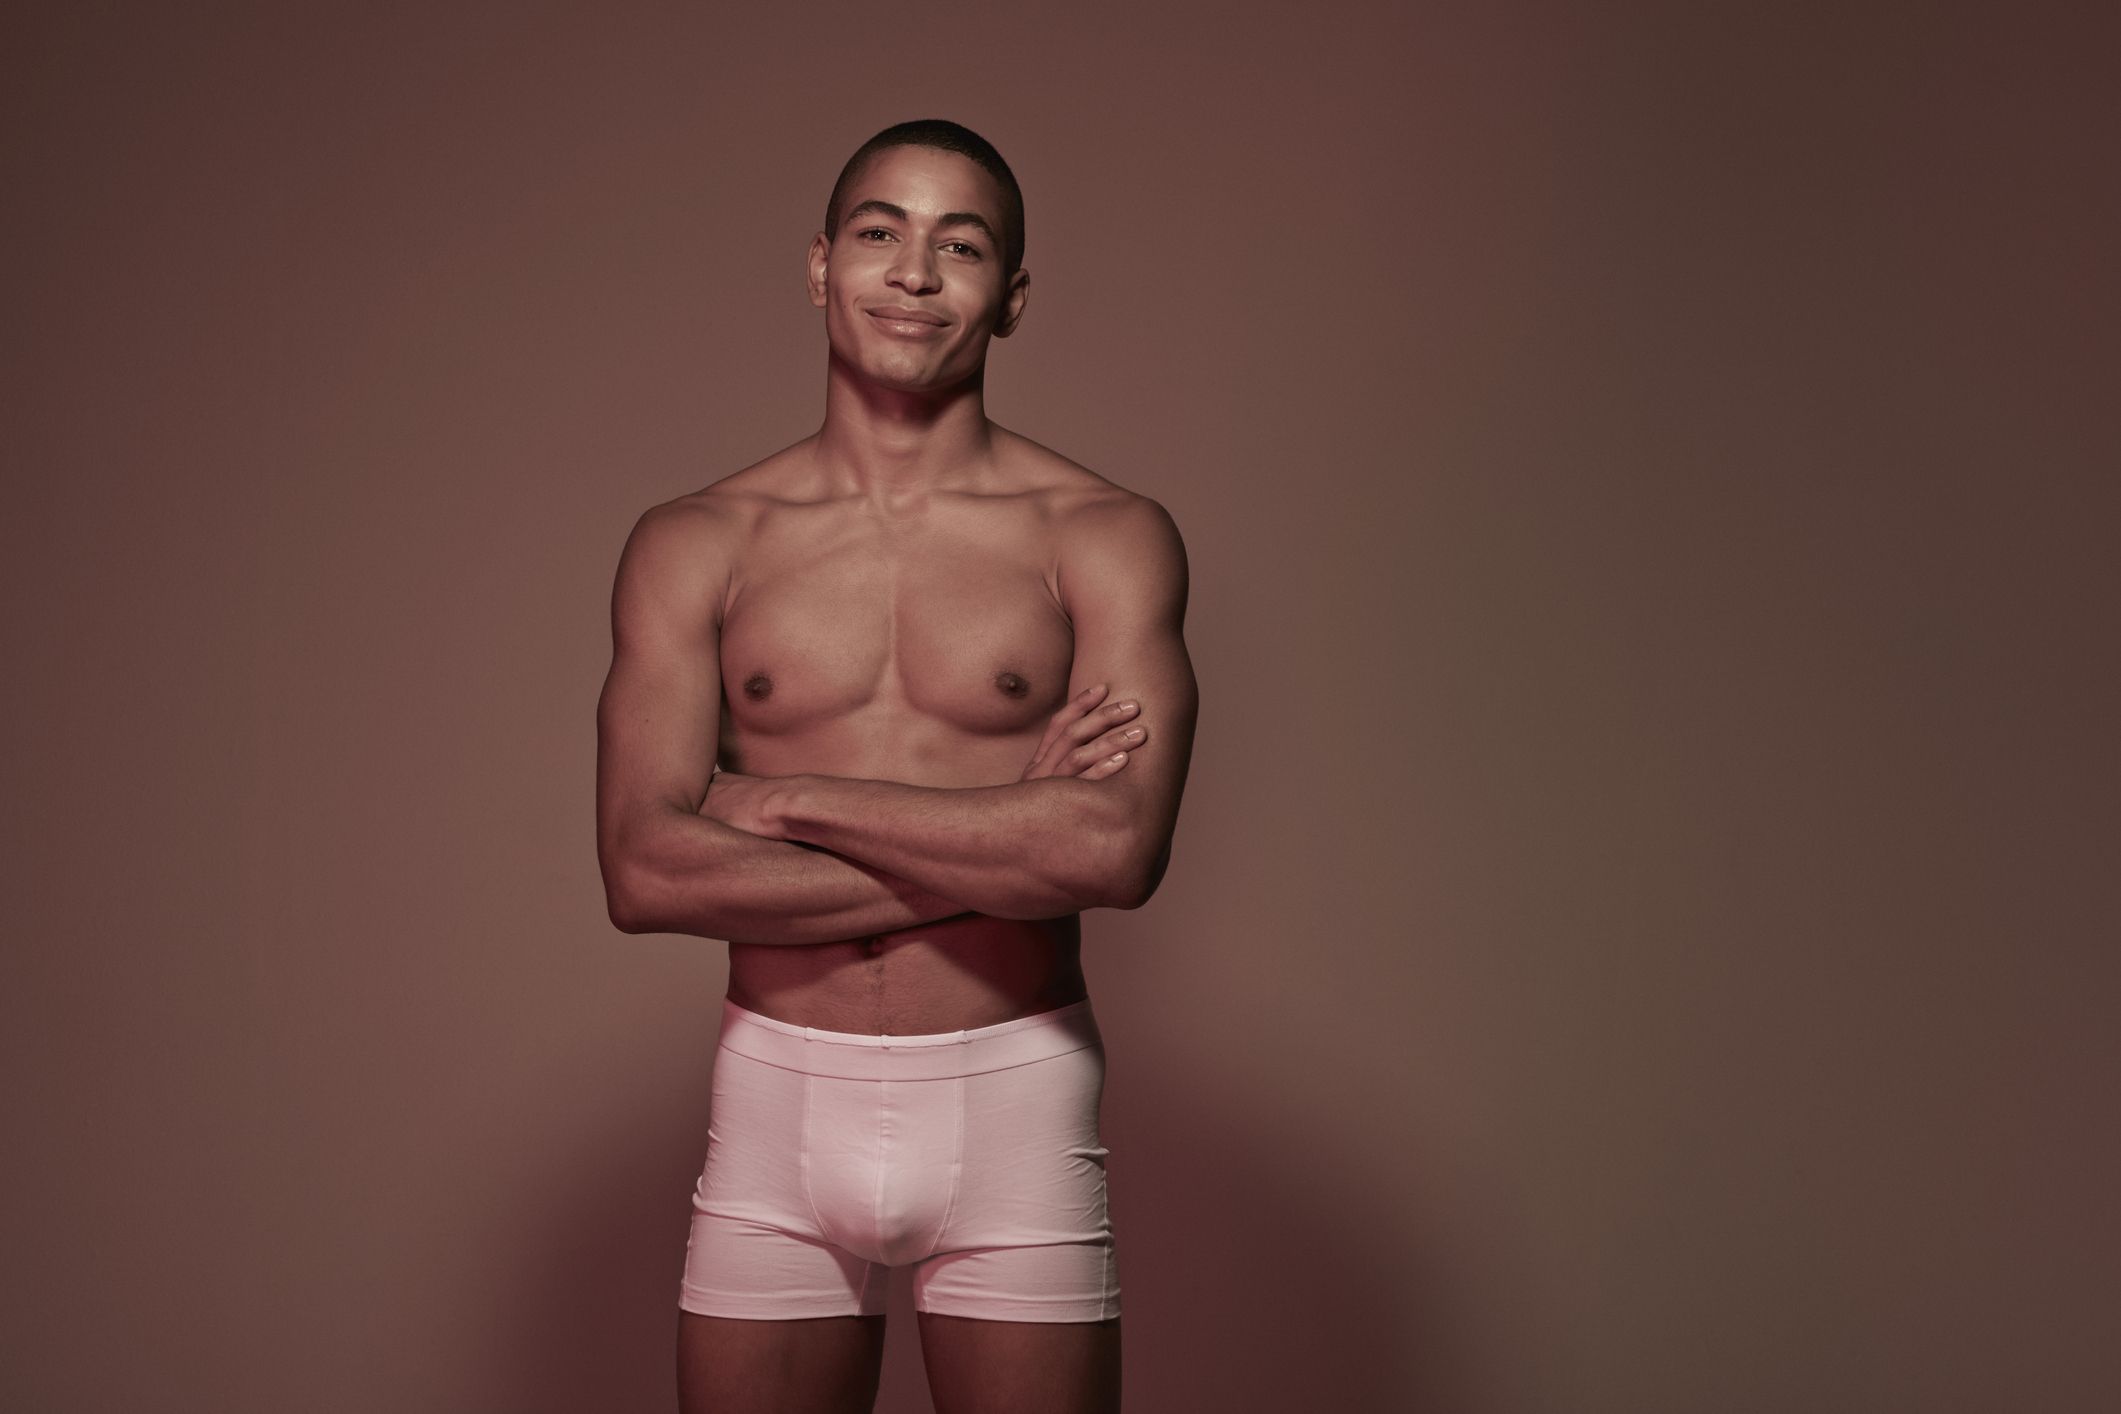 Why do some women think most men care if they are wearing matching underwear?  - Quora